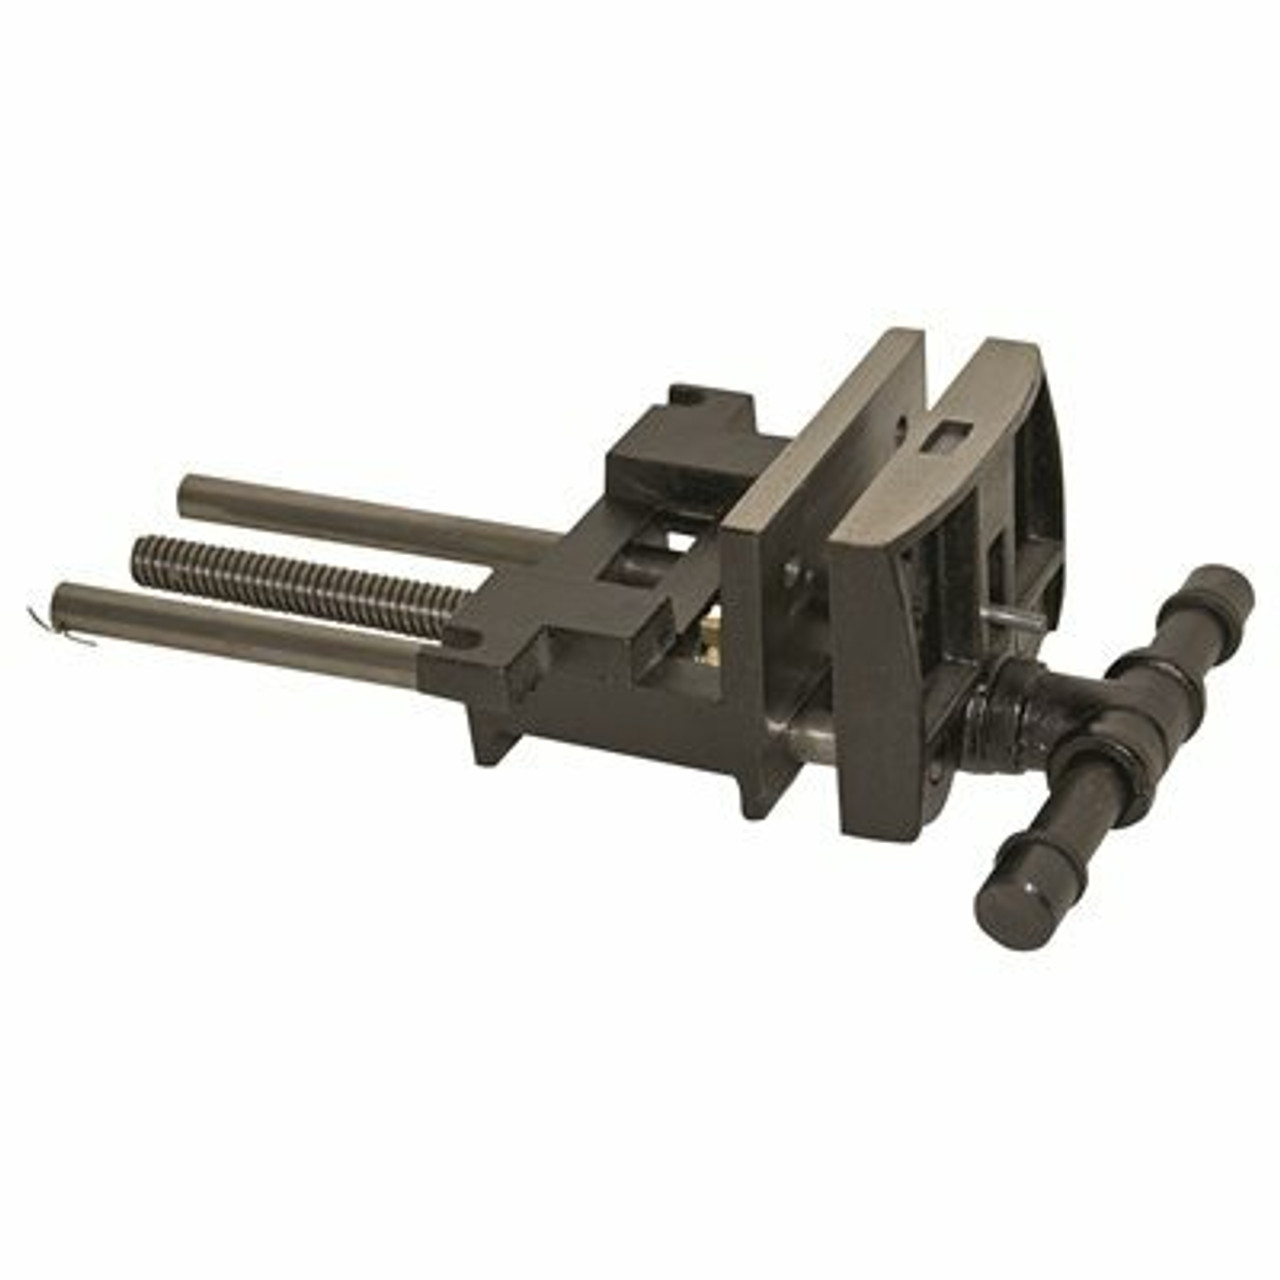 Yost 7 In. X 9 In. Wood Working Vise